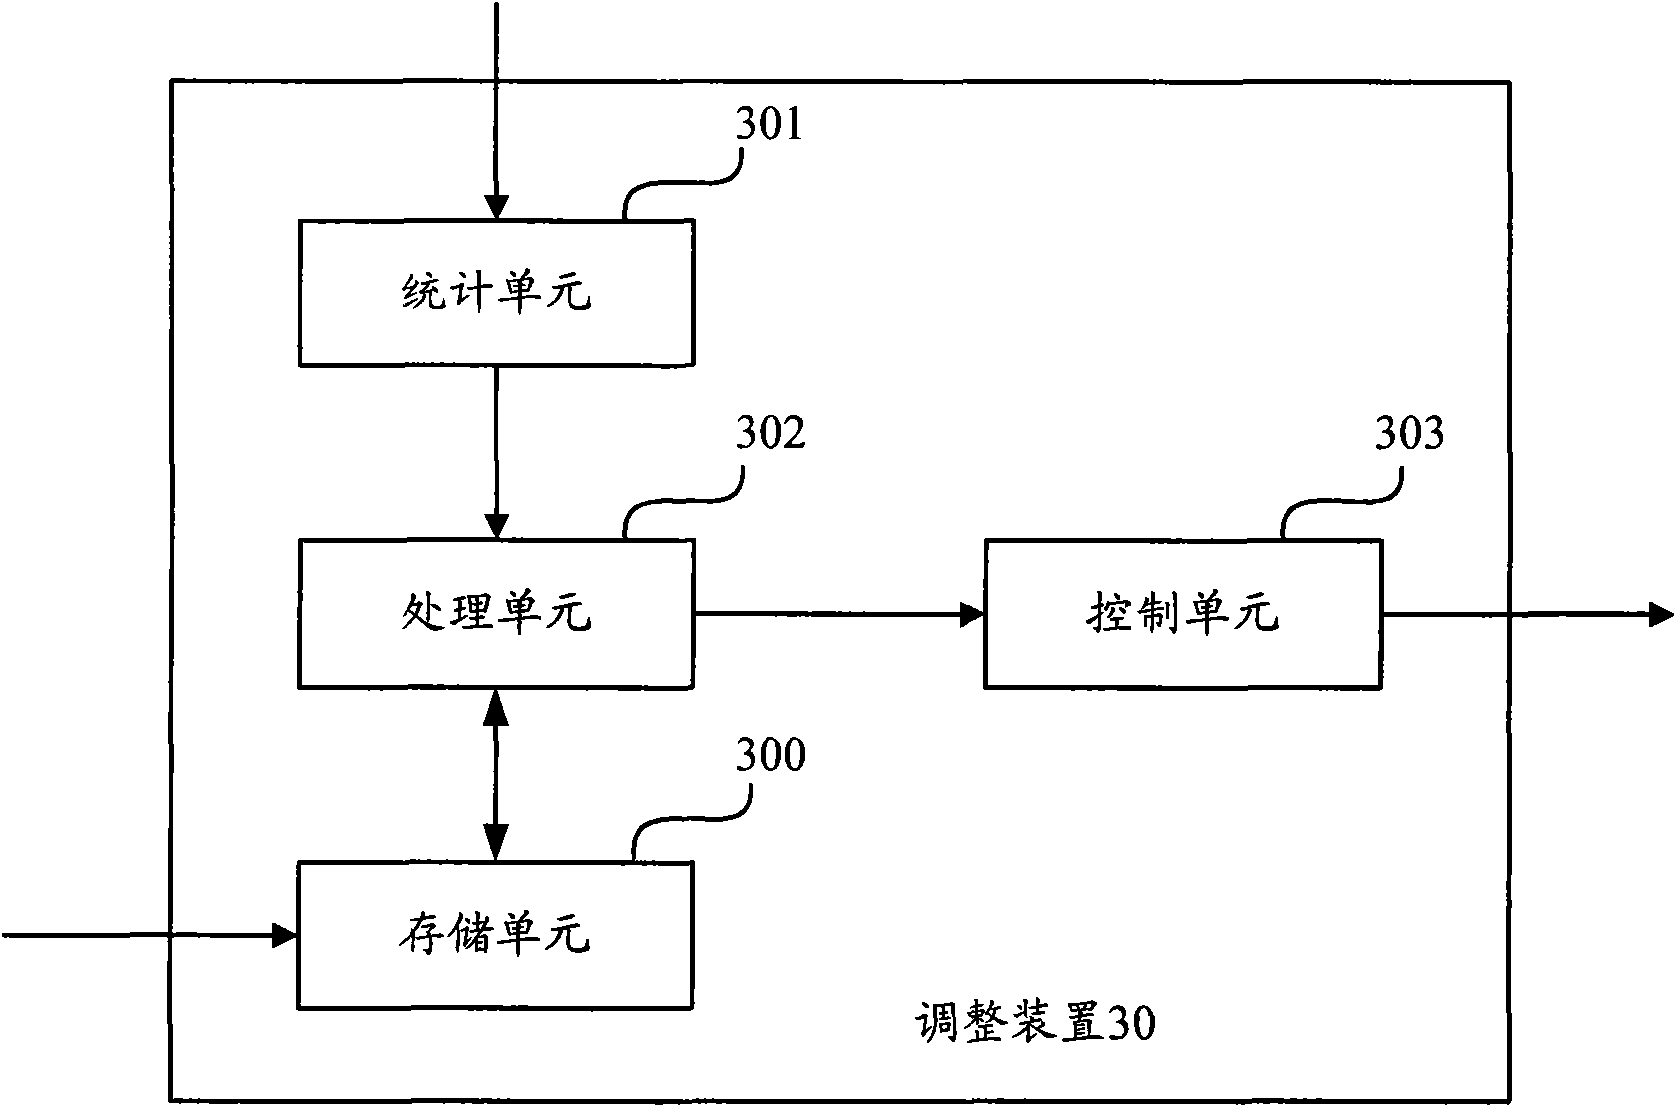 Method as well as device and system for adjusting working voltage of multi-carrier power amplifier